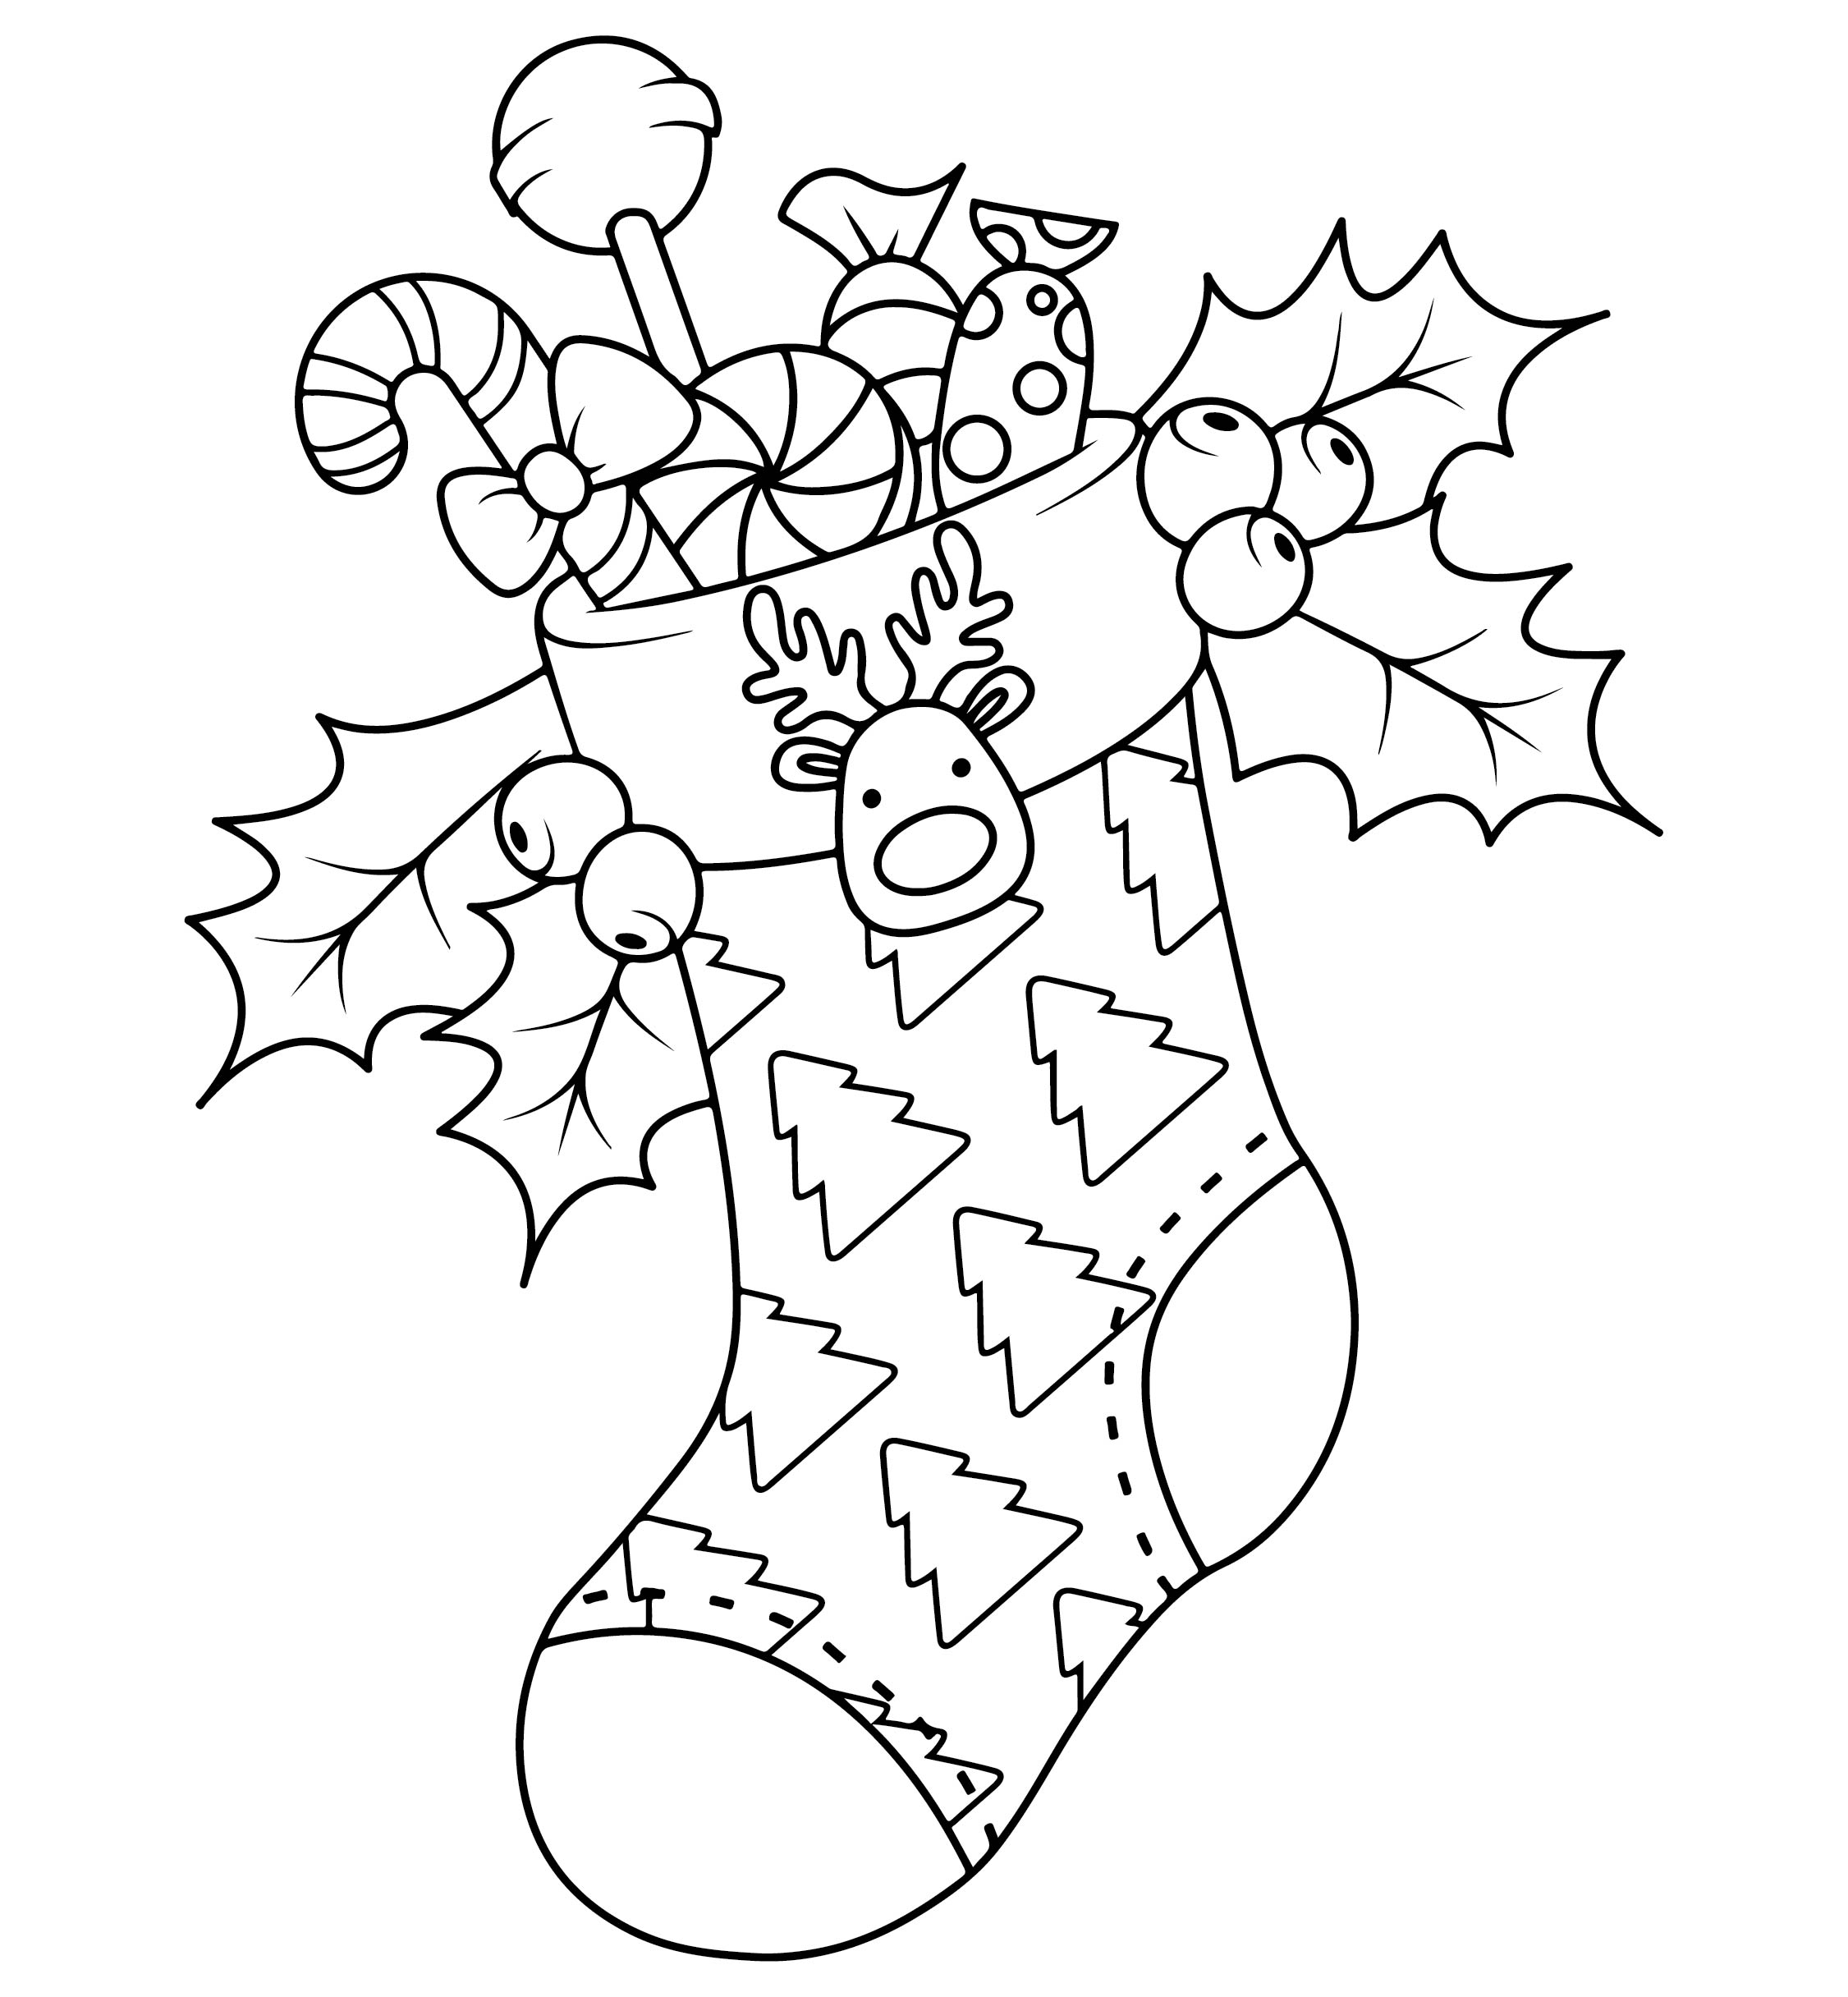 15 Best Christmas Stocking Coloring Pages Printable PDF for Free at